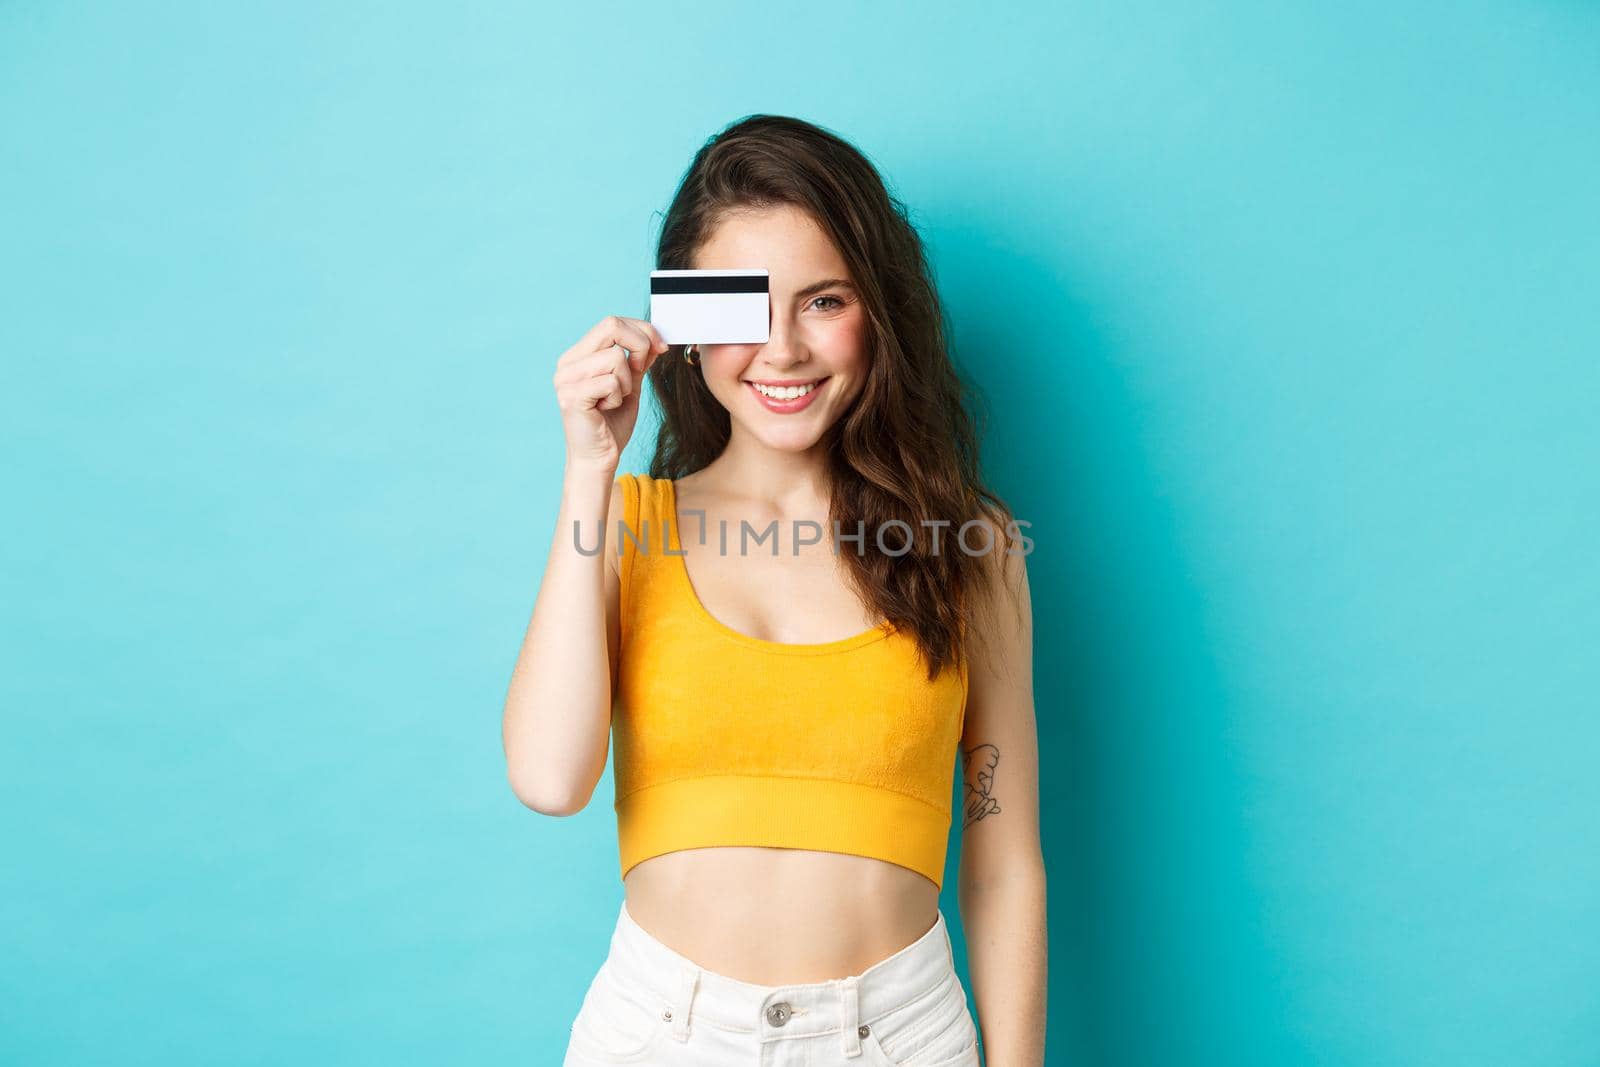 Young stylish woman showing plastic credit card over eye, looking pleased adn confident, smiling at camera, standing over blue background.